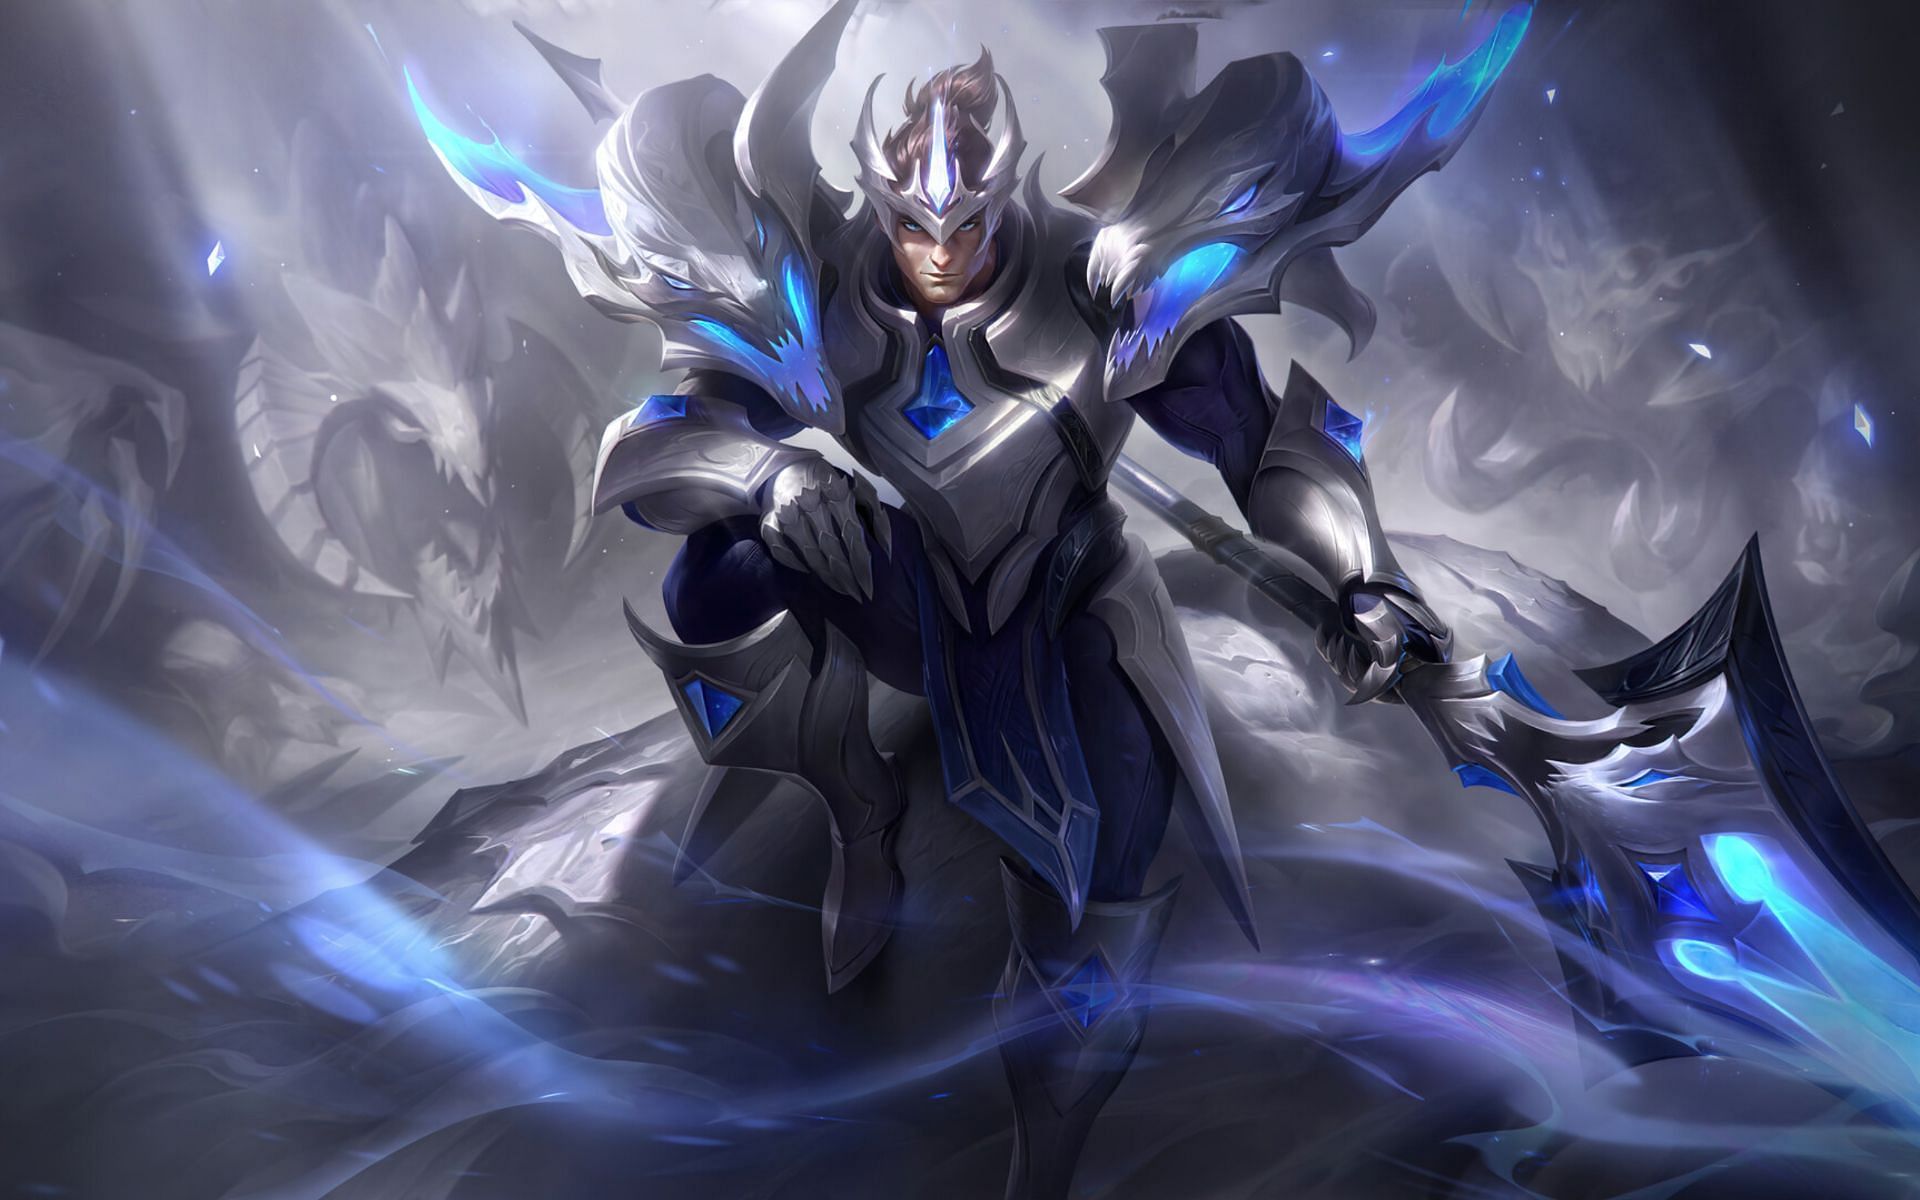 Jarvan IV has been the most dominant jungle champion in the game, even after his nerfs (Image via Riot Games)